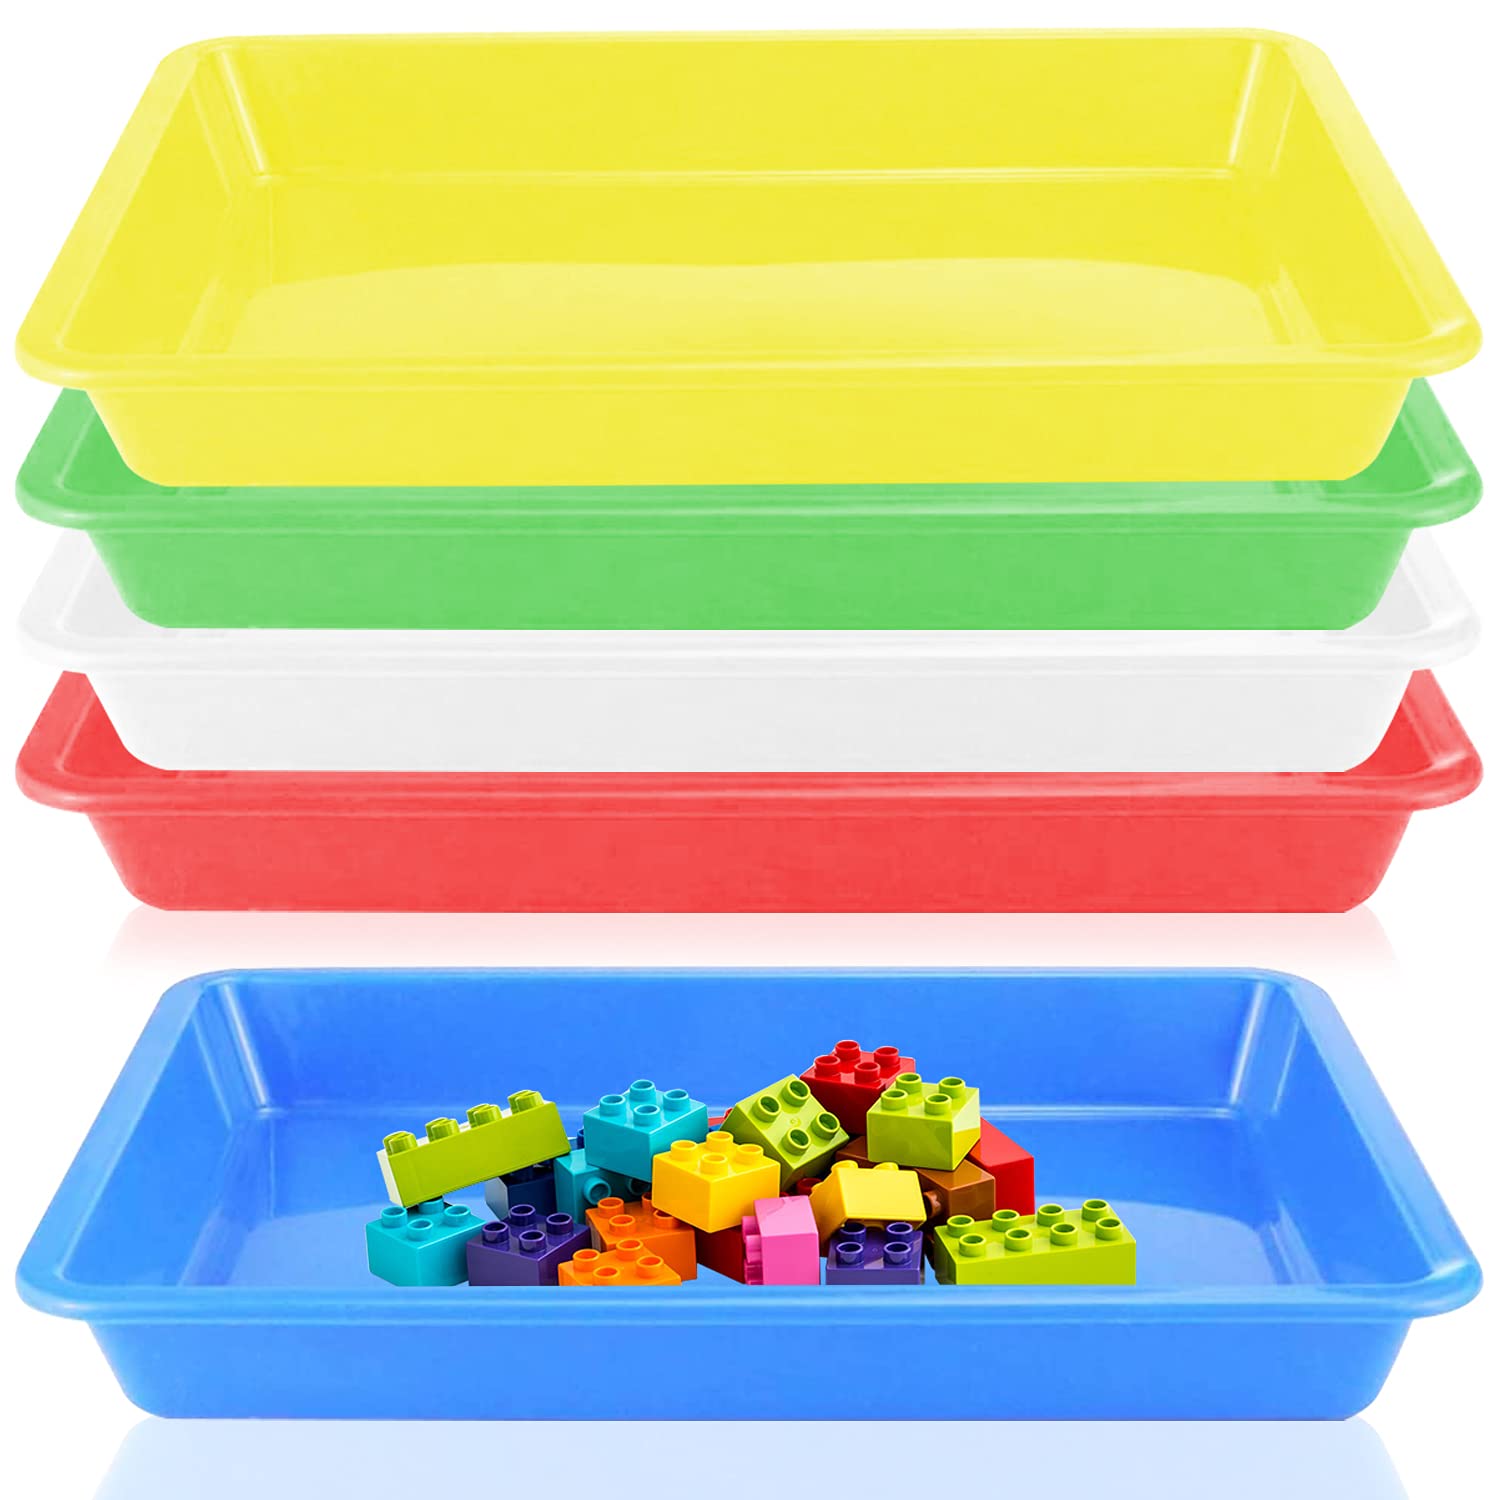 10 Pcs Multicolor Plastic Art Trays,Activity Plastic Tray,Arts and Crafts  Organizer Tray,Serving Tray for School Home Art and Crafts, DIY Projects